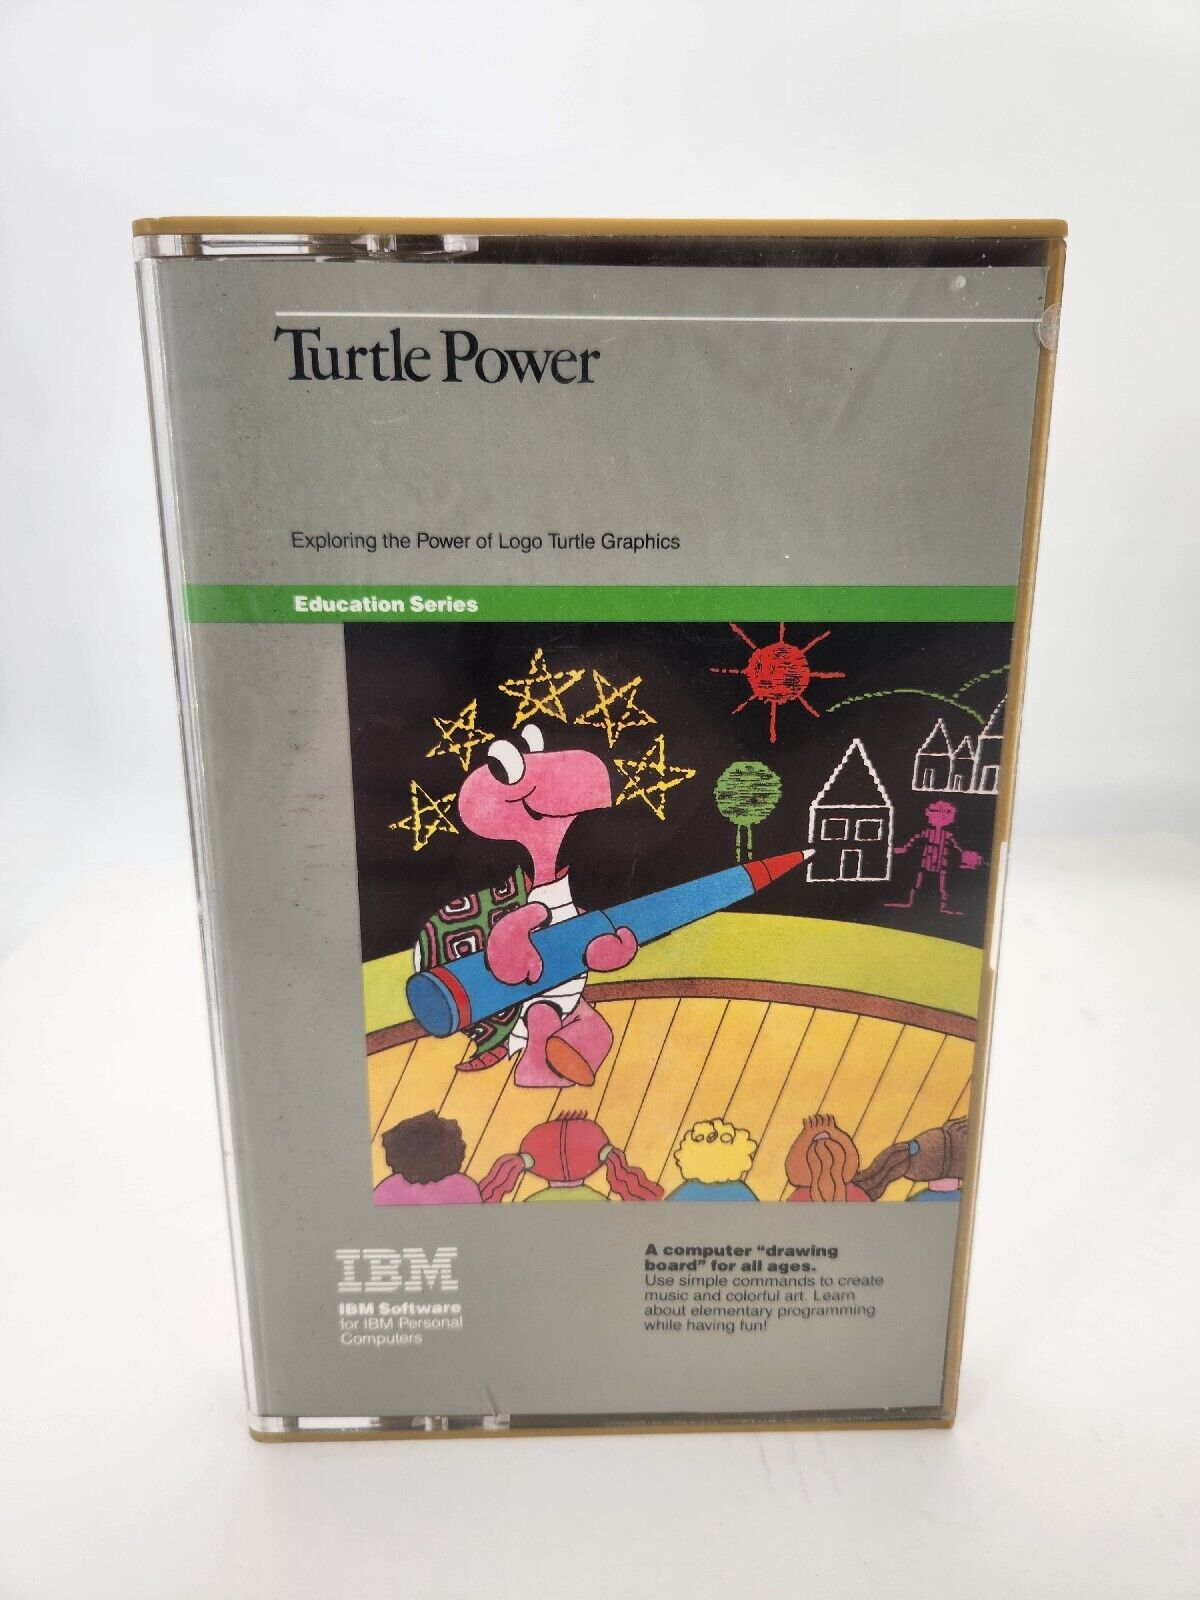 1983 IBM Turtle Power Computer drawing board For all ages complete 5.25\